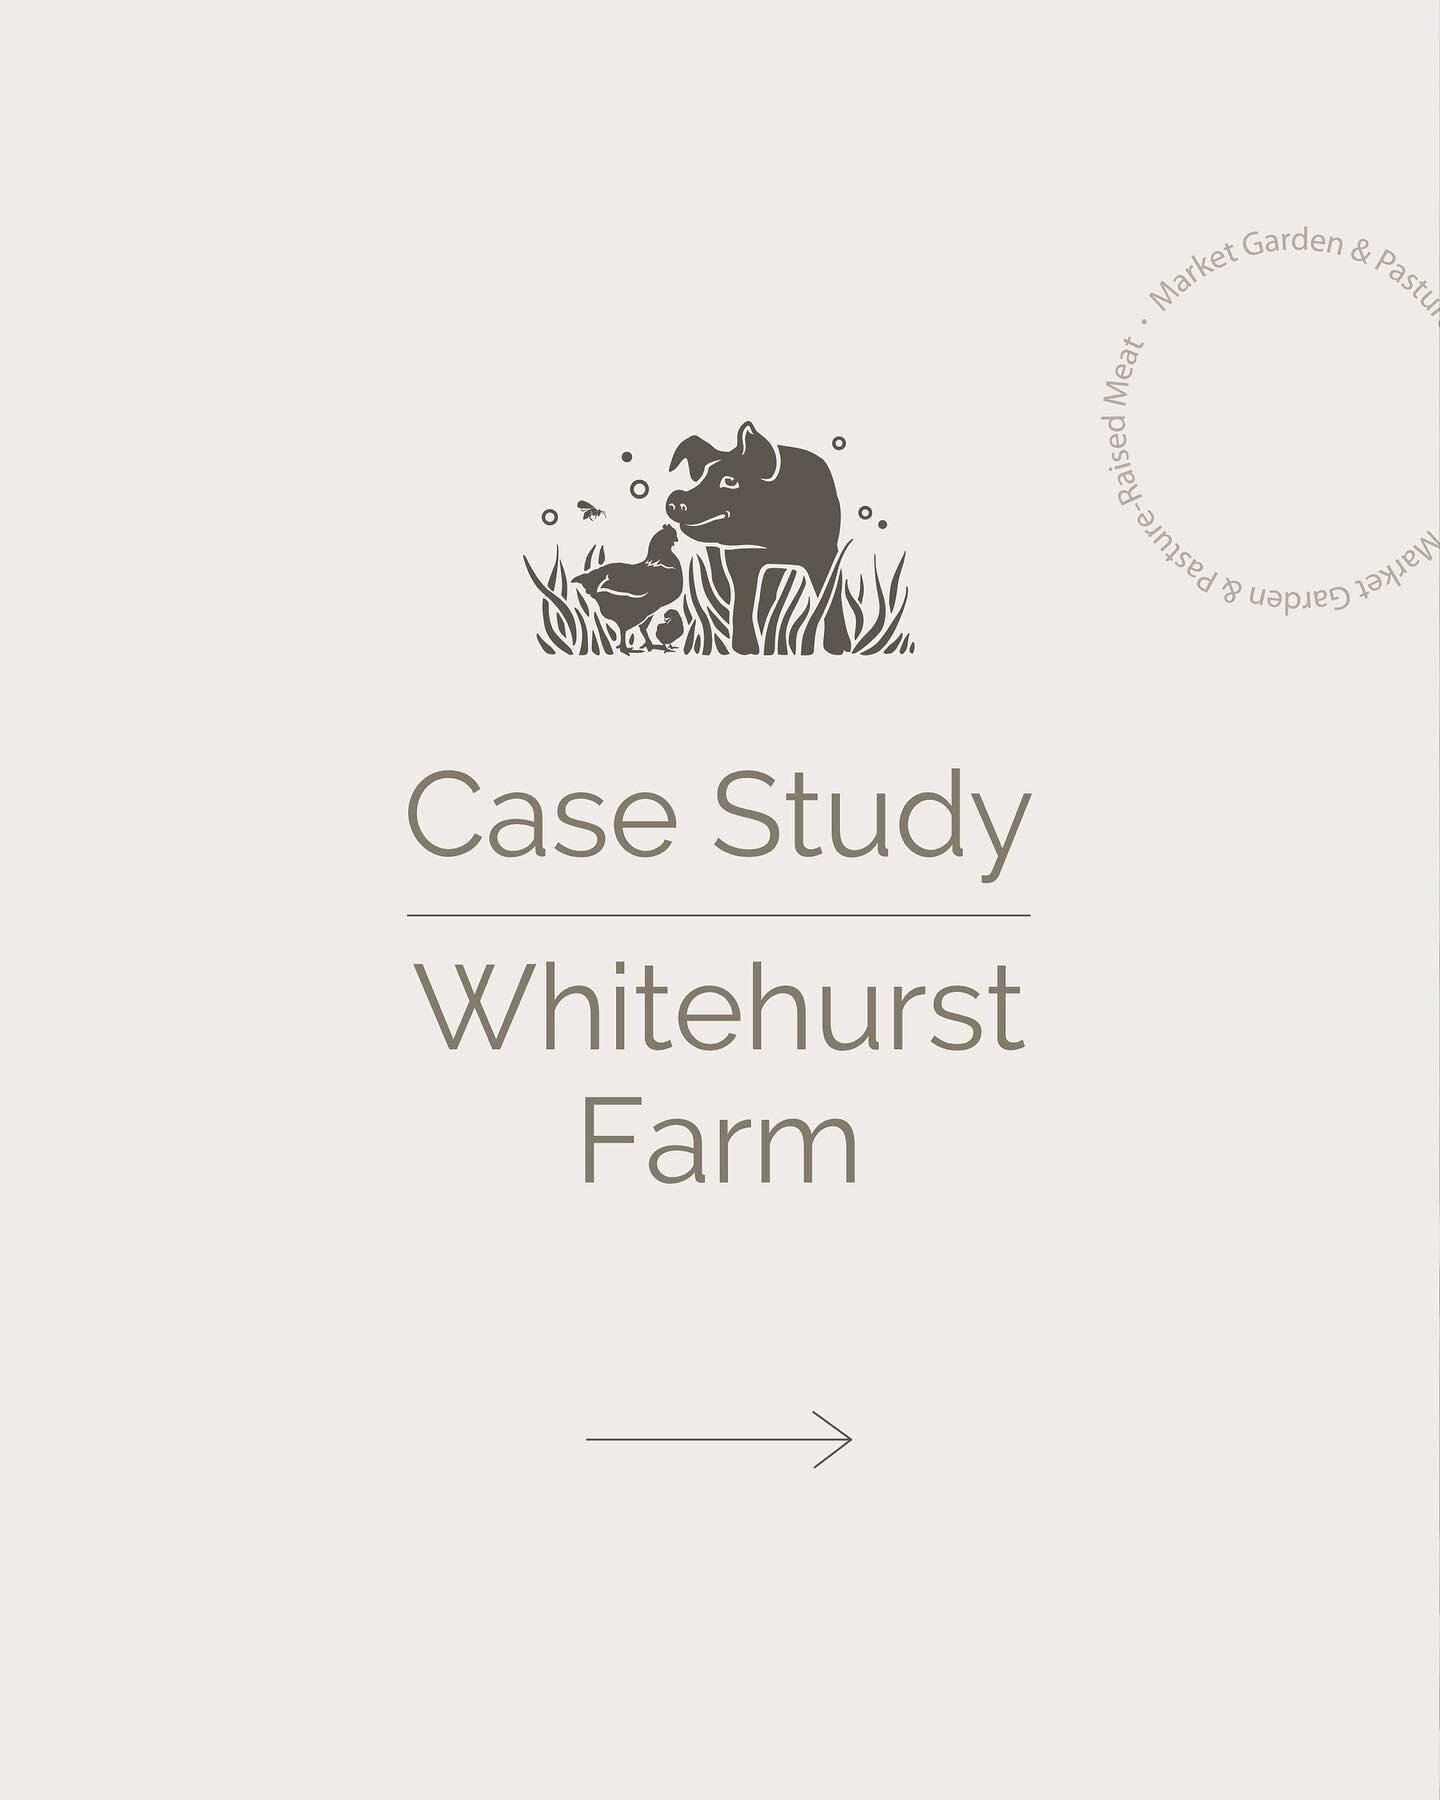 Whitehurst Farm is a family-run, Texas farm providing the area with fresh produce, juices, pasture-raised meat, honey and eggs. Enjoy this case study we put together, and find a full brief on our website 𝗷𝗲𝗻𝗻𝗰𝗼𝗿𝗱𝗼𝘃𝗮𝗱𝗲𝘀𝗶𝗴𝗻.𝗰𝗼𝗺/𝗼𝘂